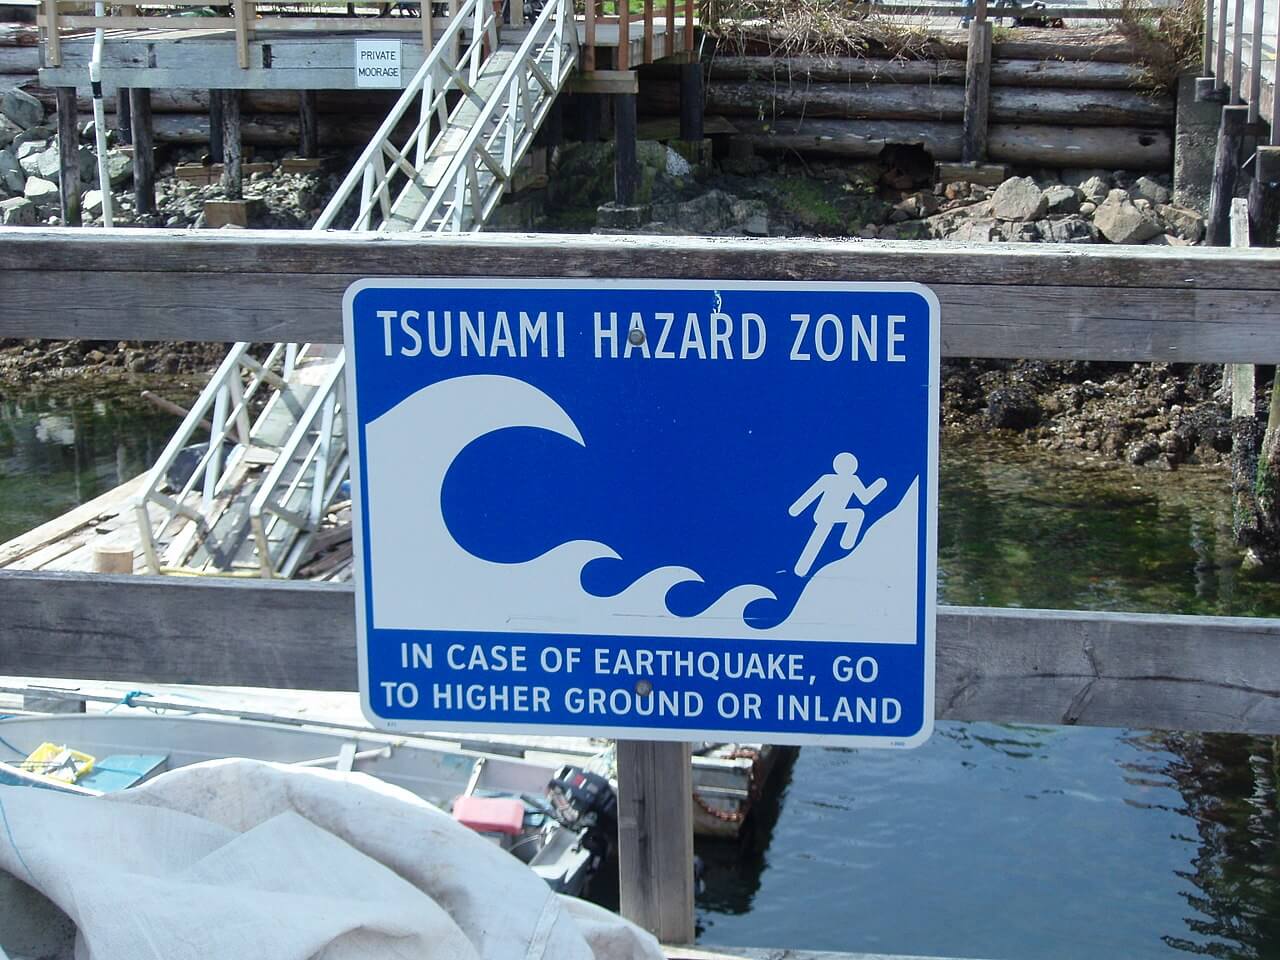 Tsunami warning sign that reads TSUNAMI HAZARD ZONE IN CASE OF EARTHQUAKE, GO TO HIGHER GROUND OR INLAND.